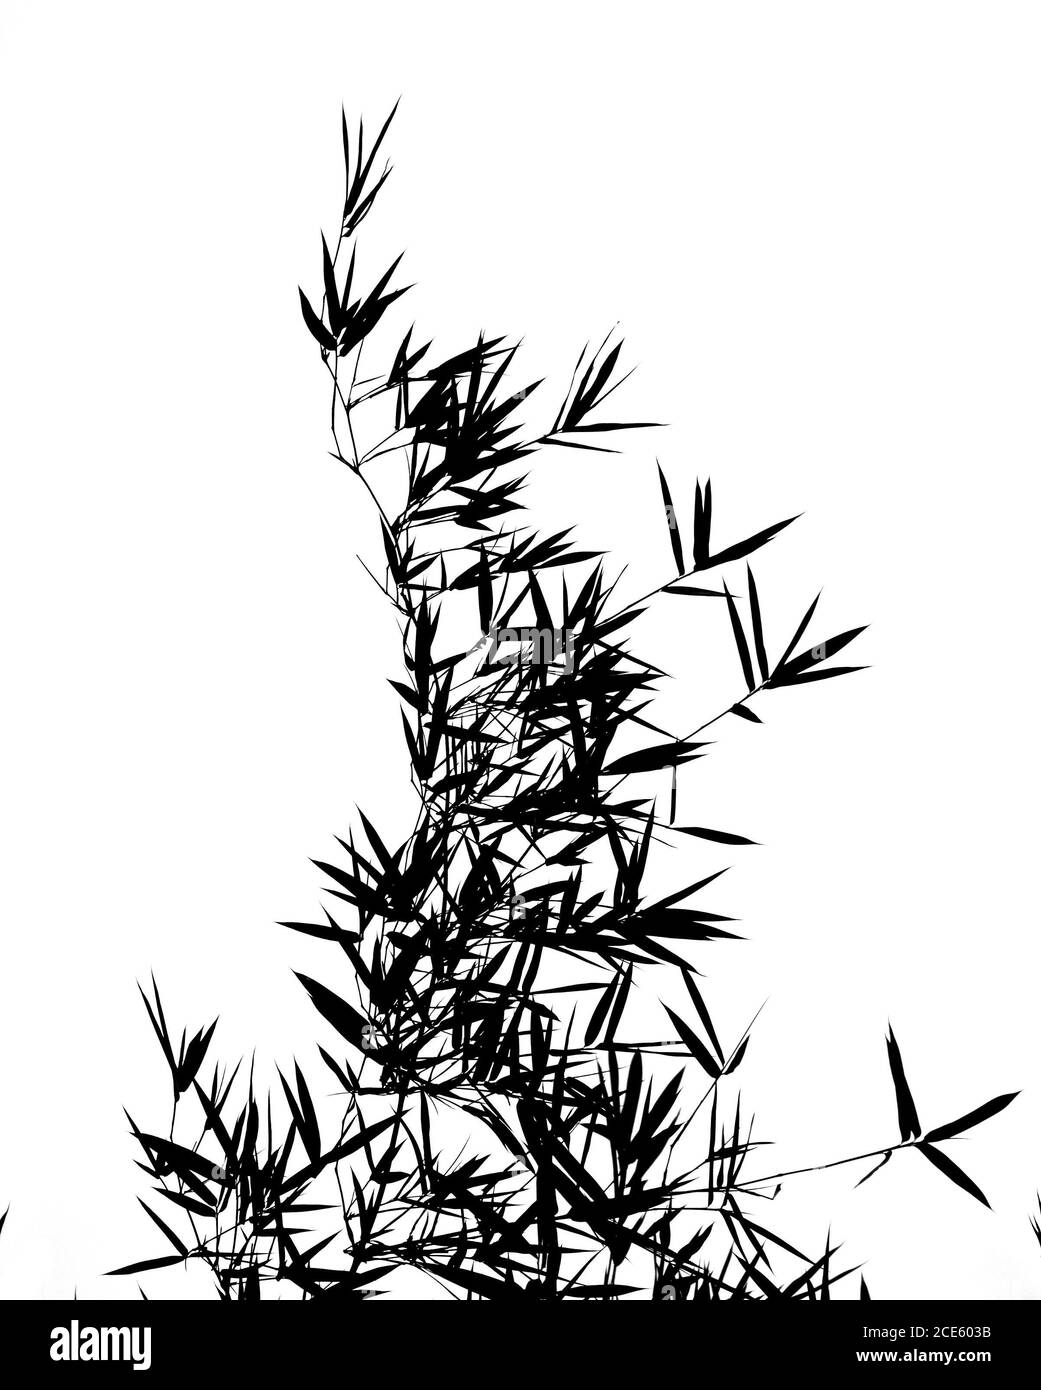 The leaves and branches of a bamboo tree seen as a silhouette Stock Photo